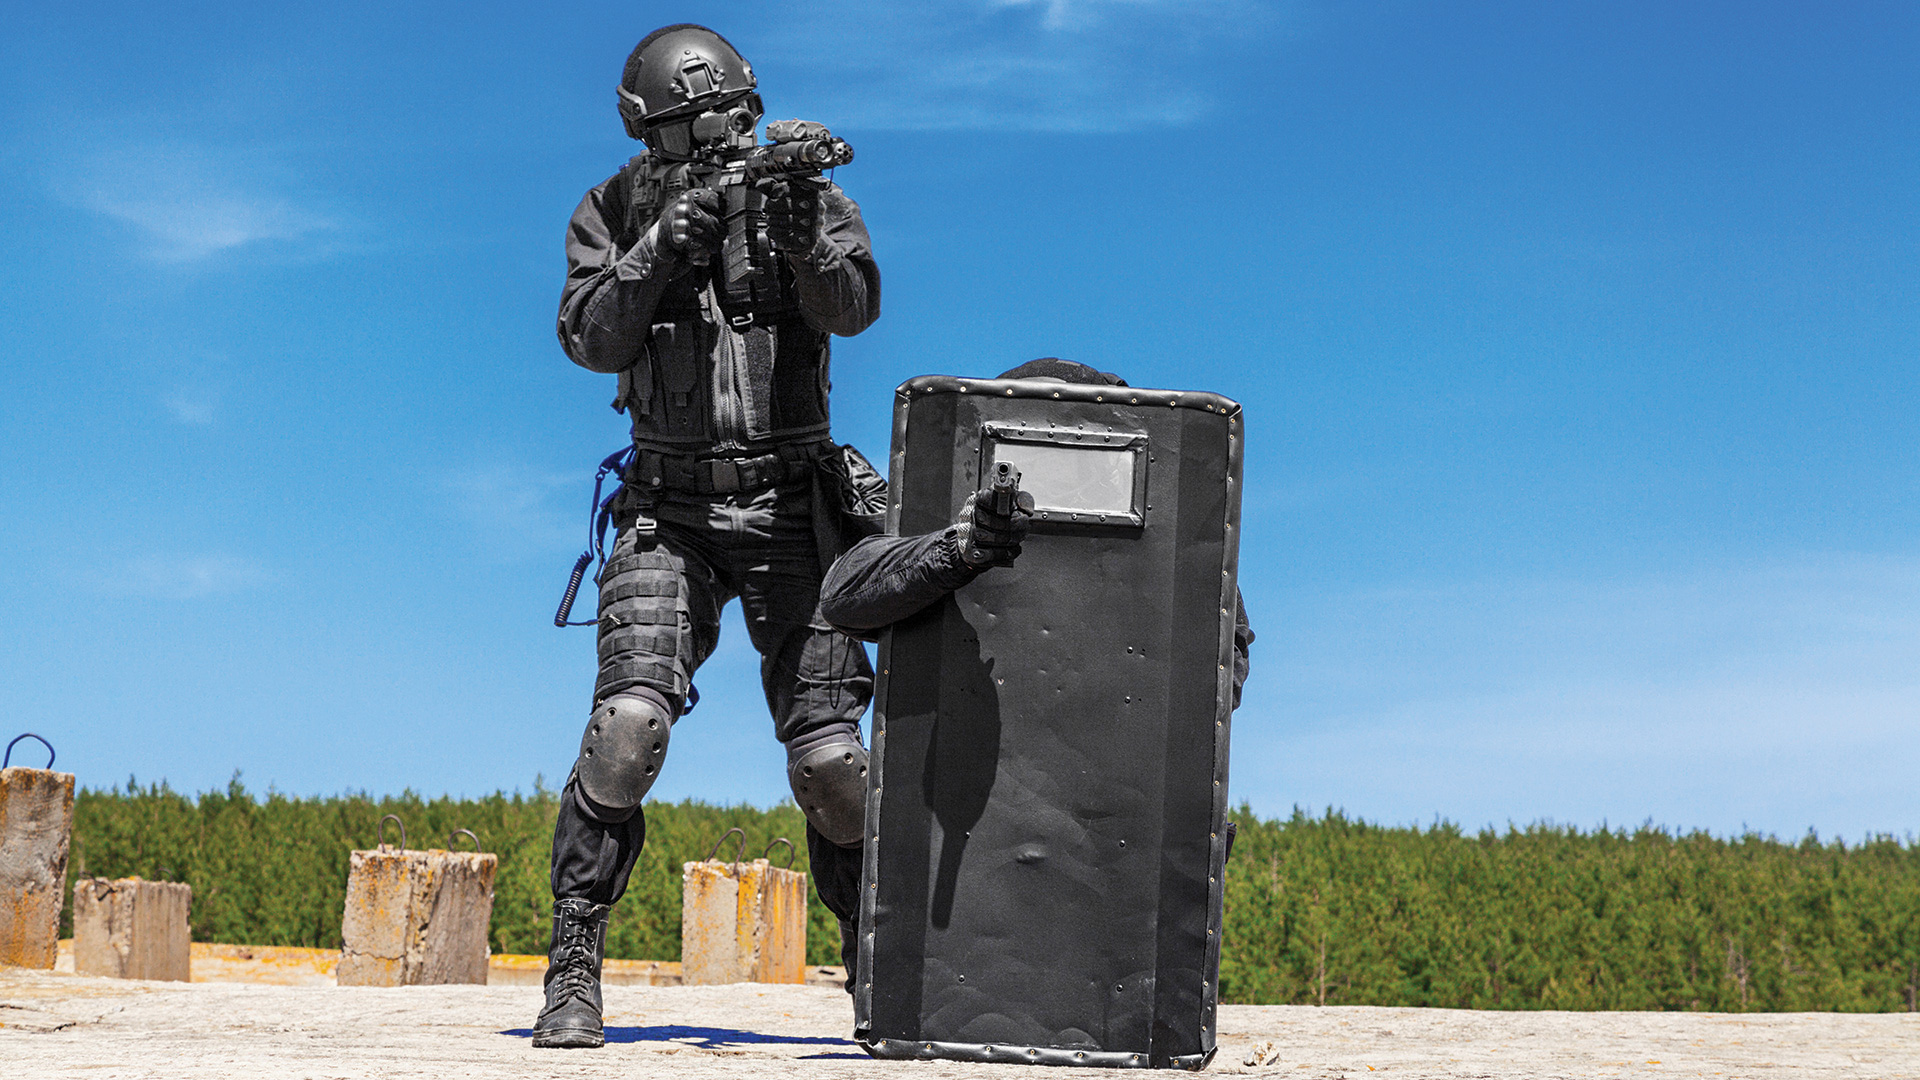 Review: RPAMS A2 Buckler ballistic shield for patrol officers